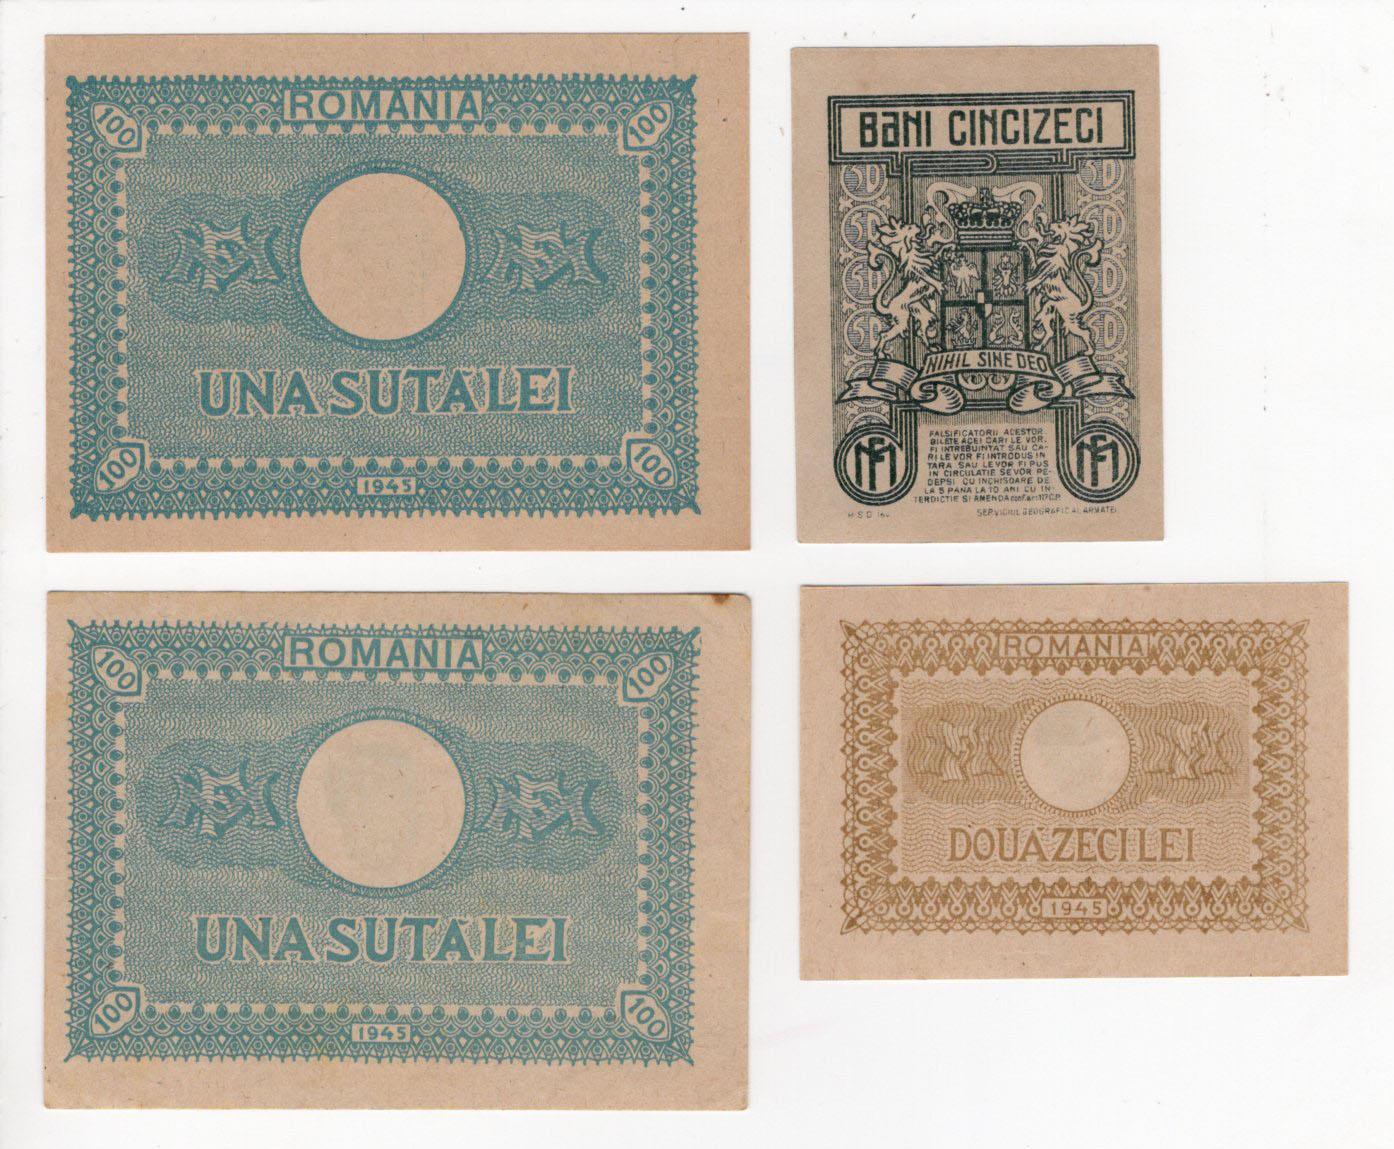 Romania (4), 50 Bani dated 1917, 20 Lei 1945, 100 Lei 1945 x 2 Uncirculated or about - Image 2 of 2